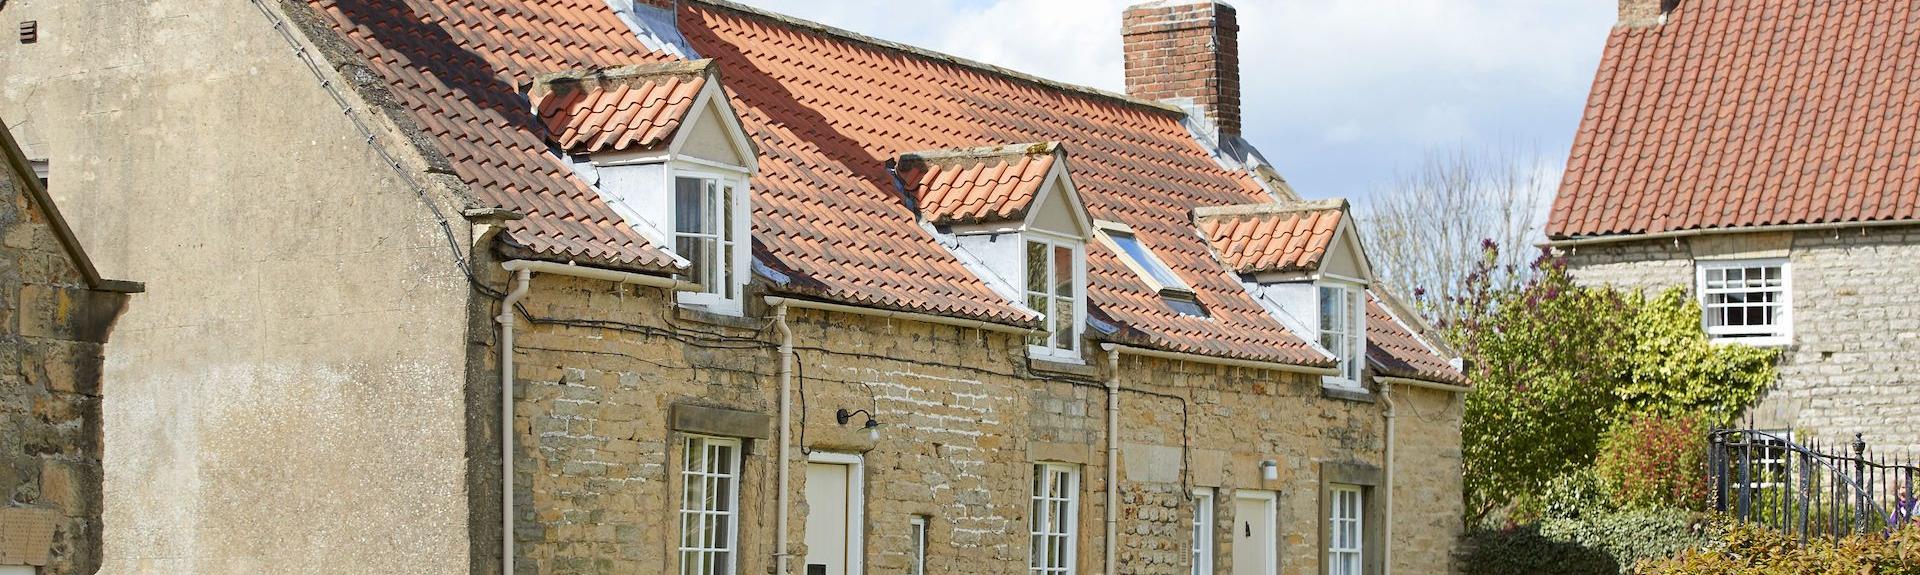 the exterior of a stone built holiday cottage in North Yorkshire with terracotta roof and grassy lawns.